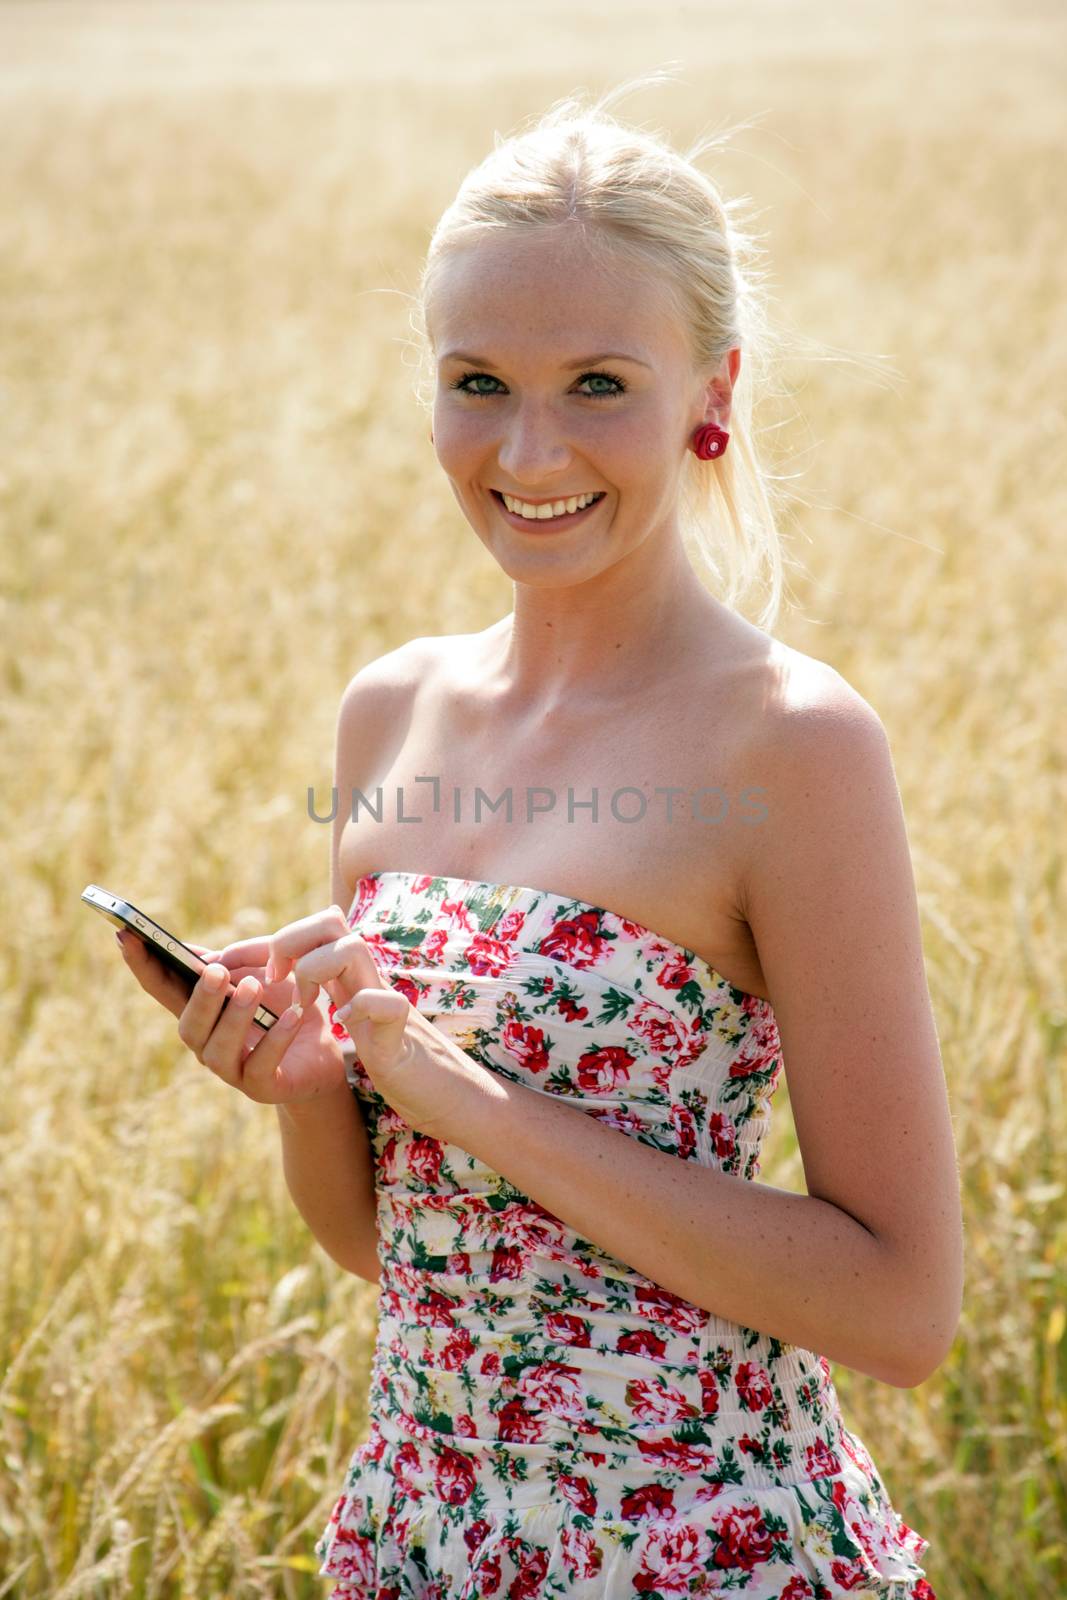 Young attractive woman standing in a wheat field, using her cellphone. She looks happy and relaxed.